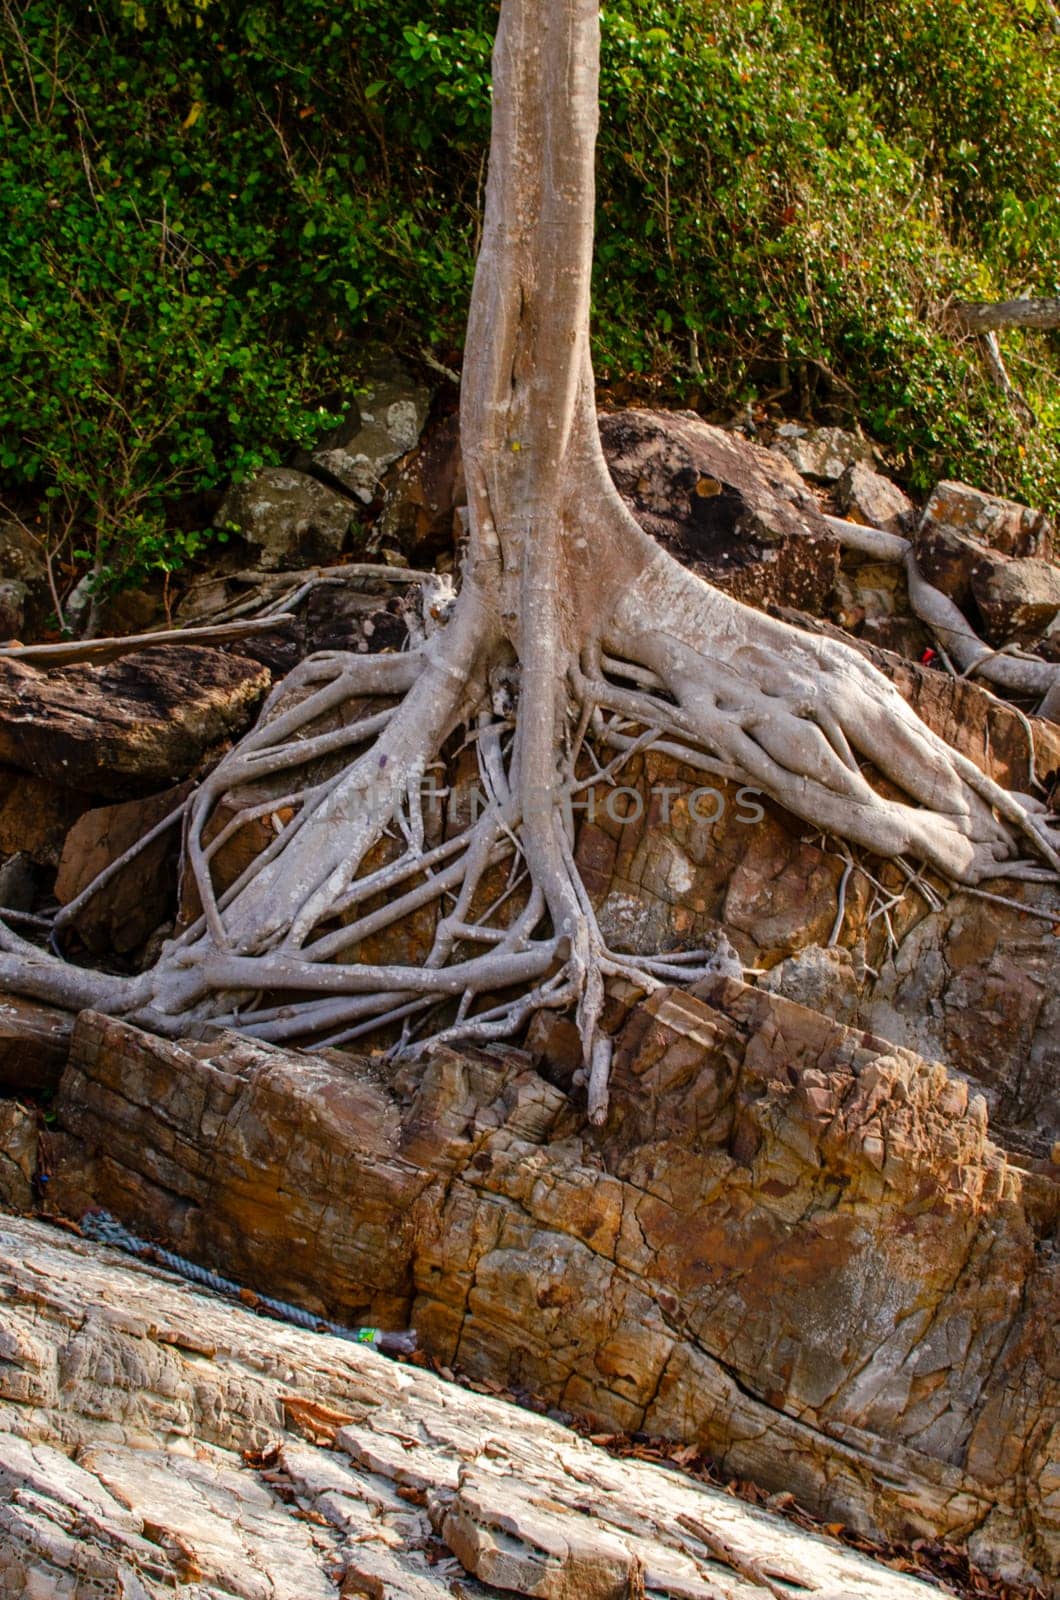 Tree roots on the beach abstract photo.